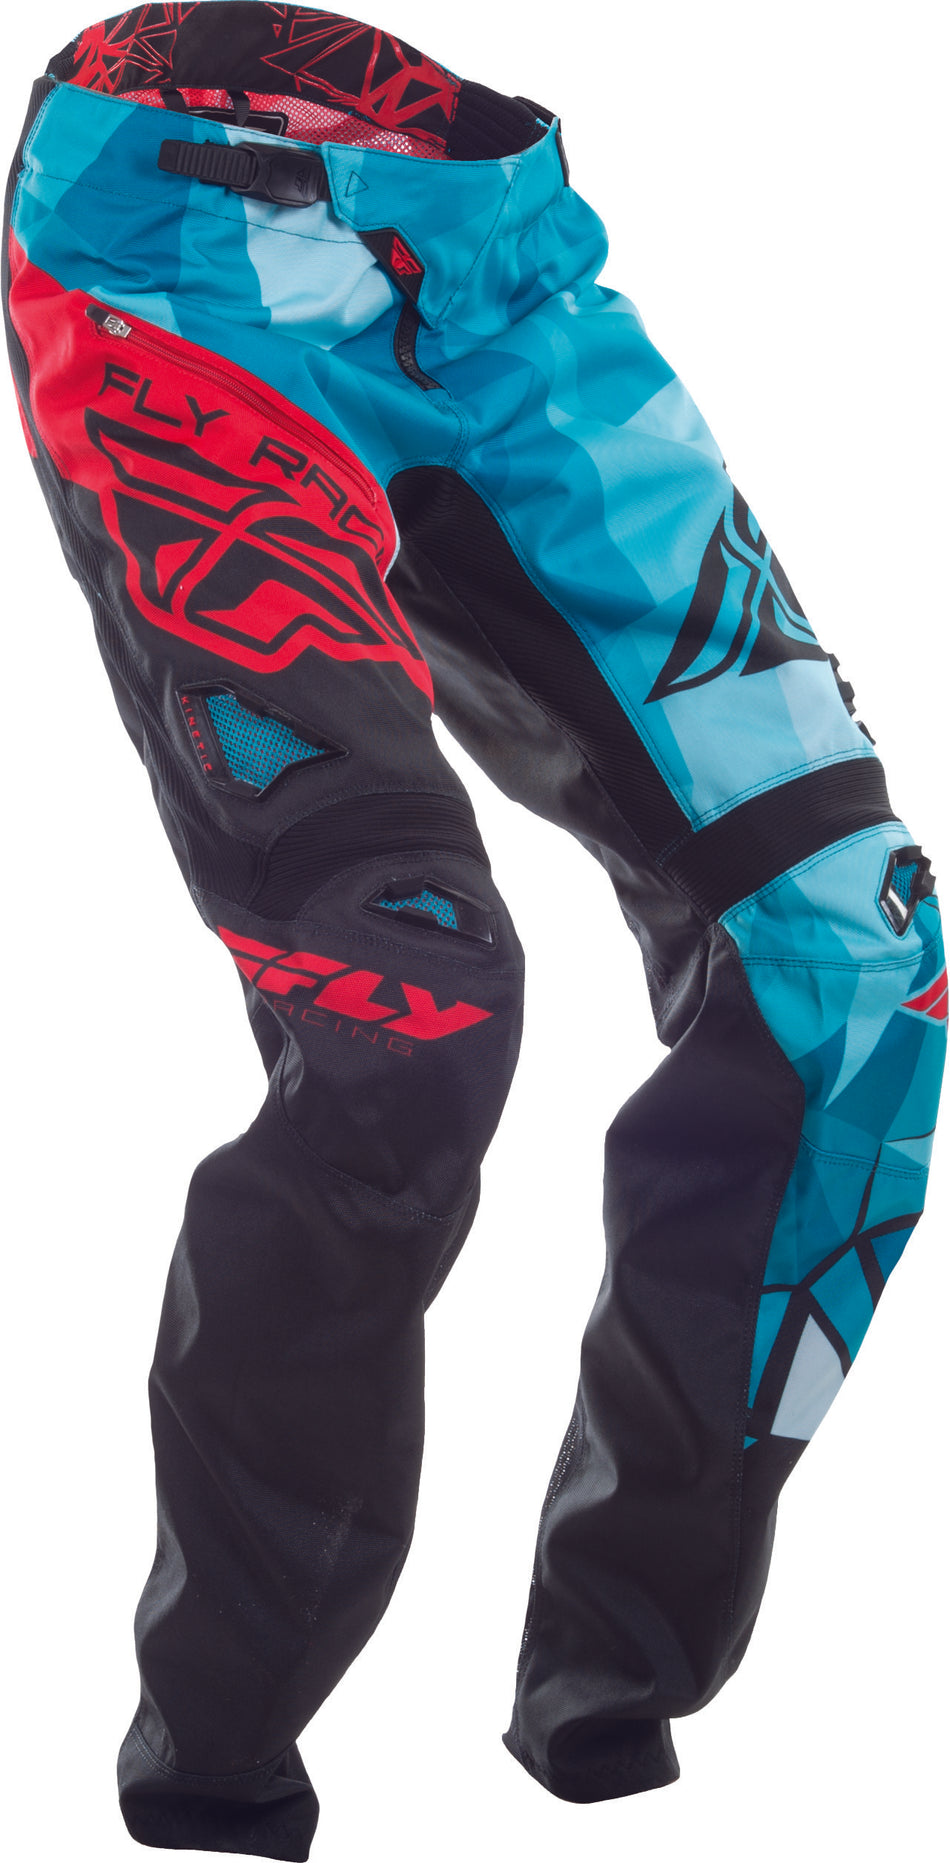 FLY RACING Bicycle Crux Pant Black/Teal/Red Sz 36 370-02936